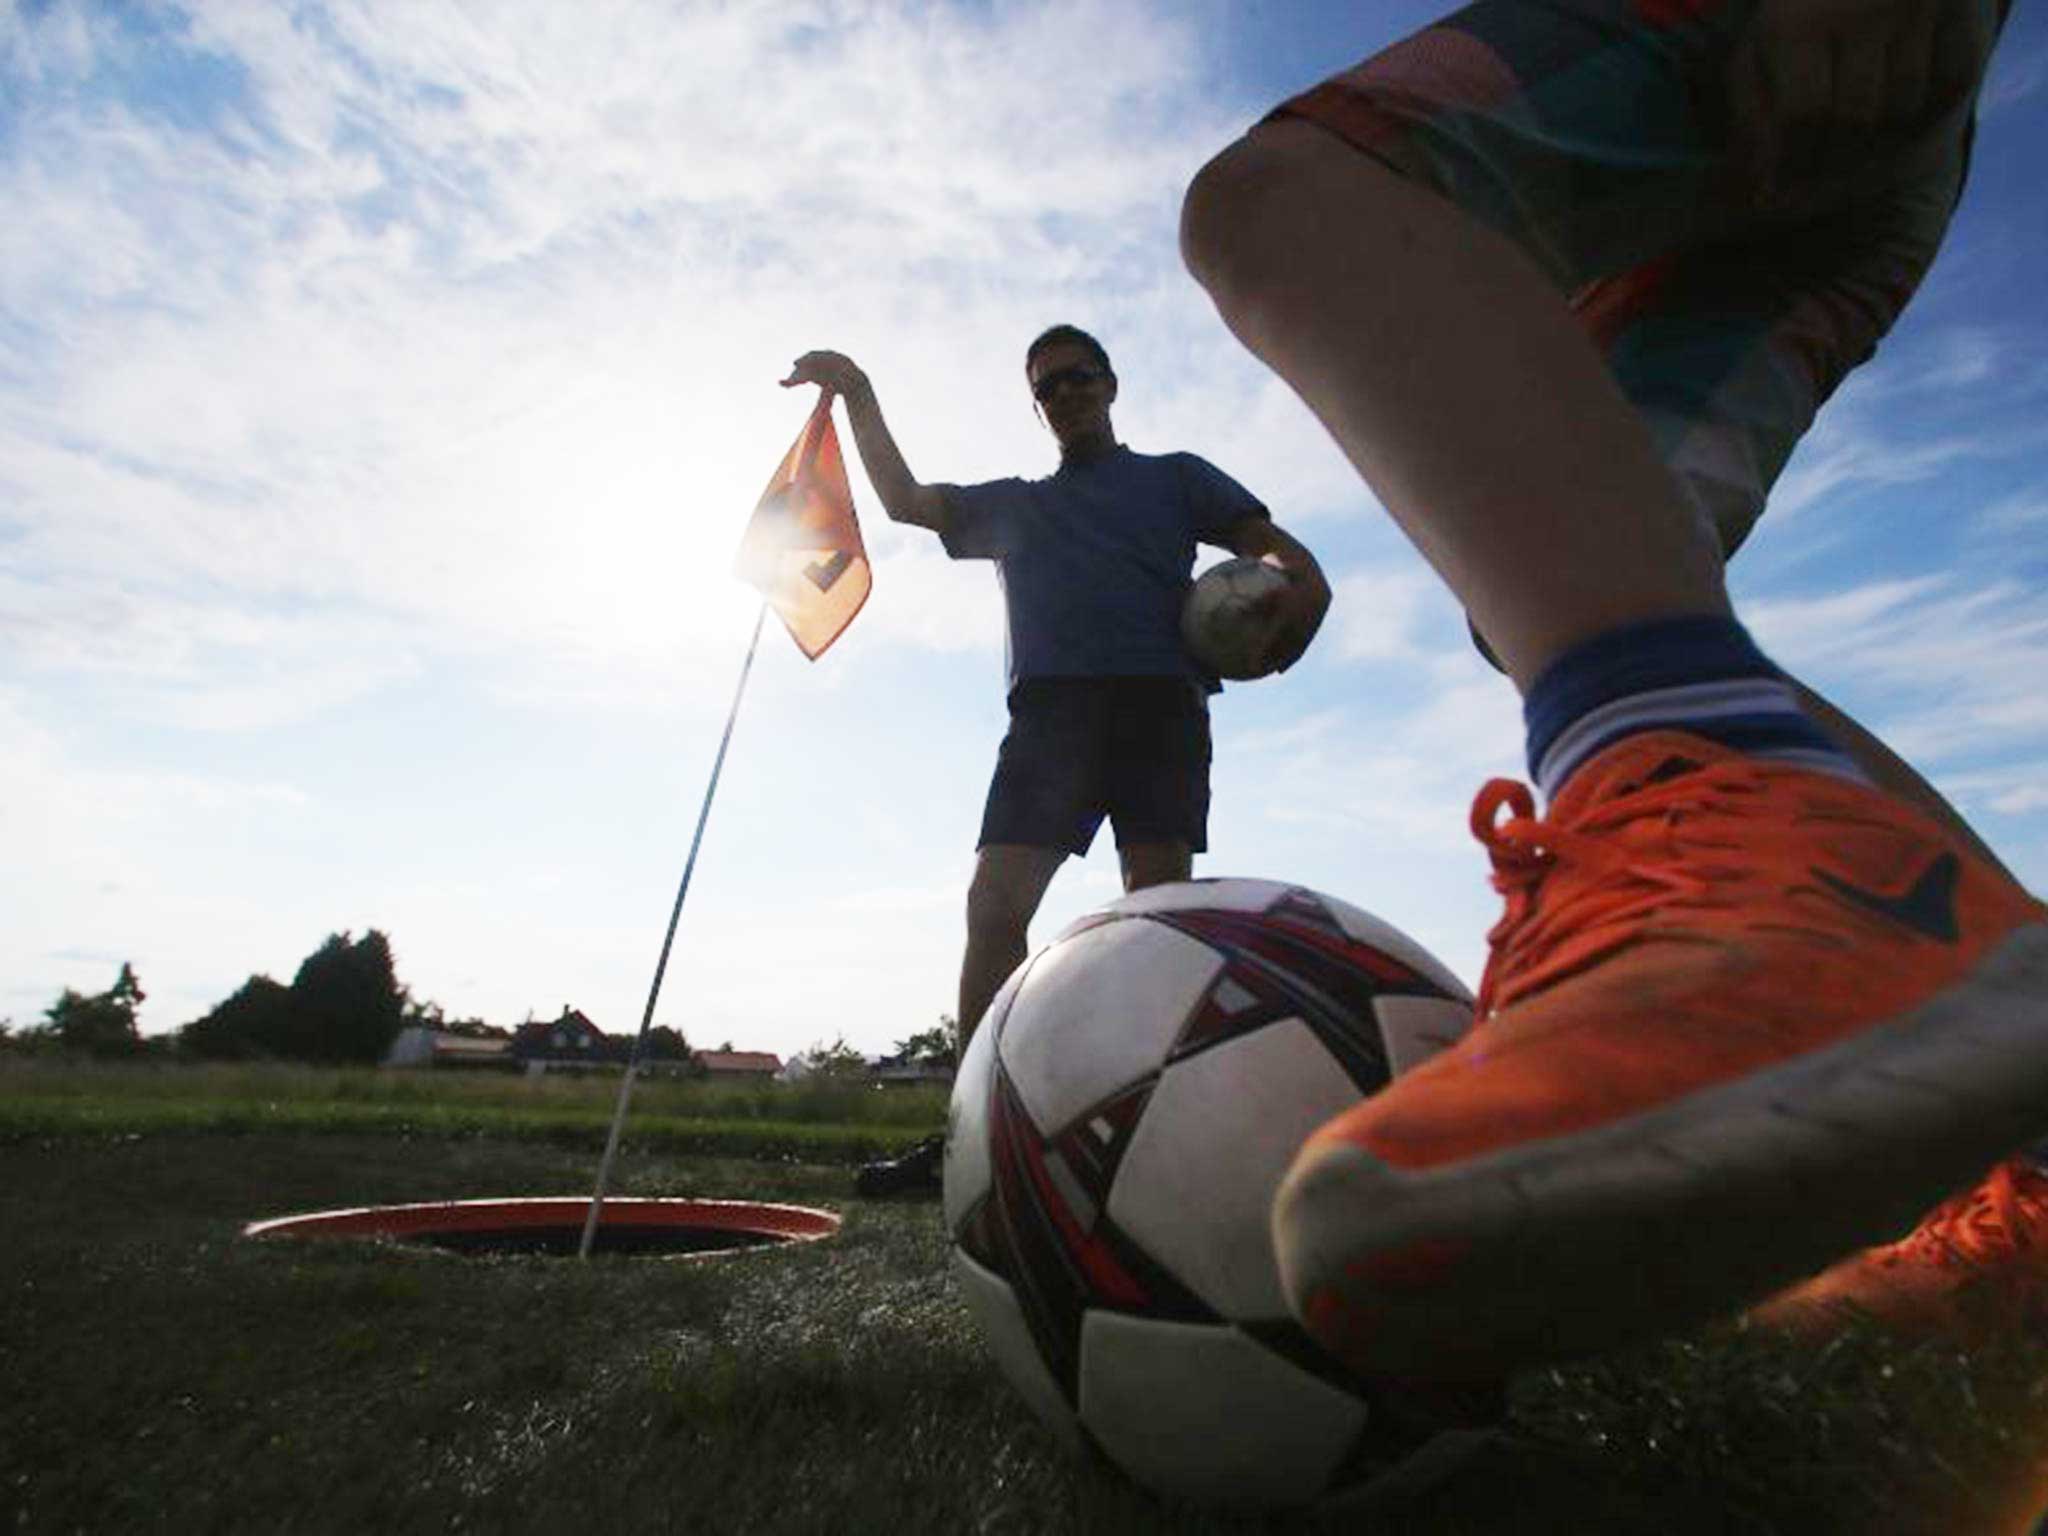 Kick-off: The US has almost 200 FootGolf courses across 37 states